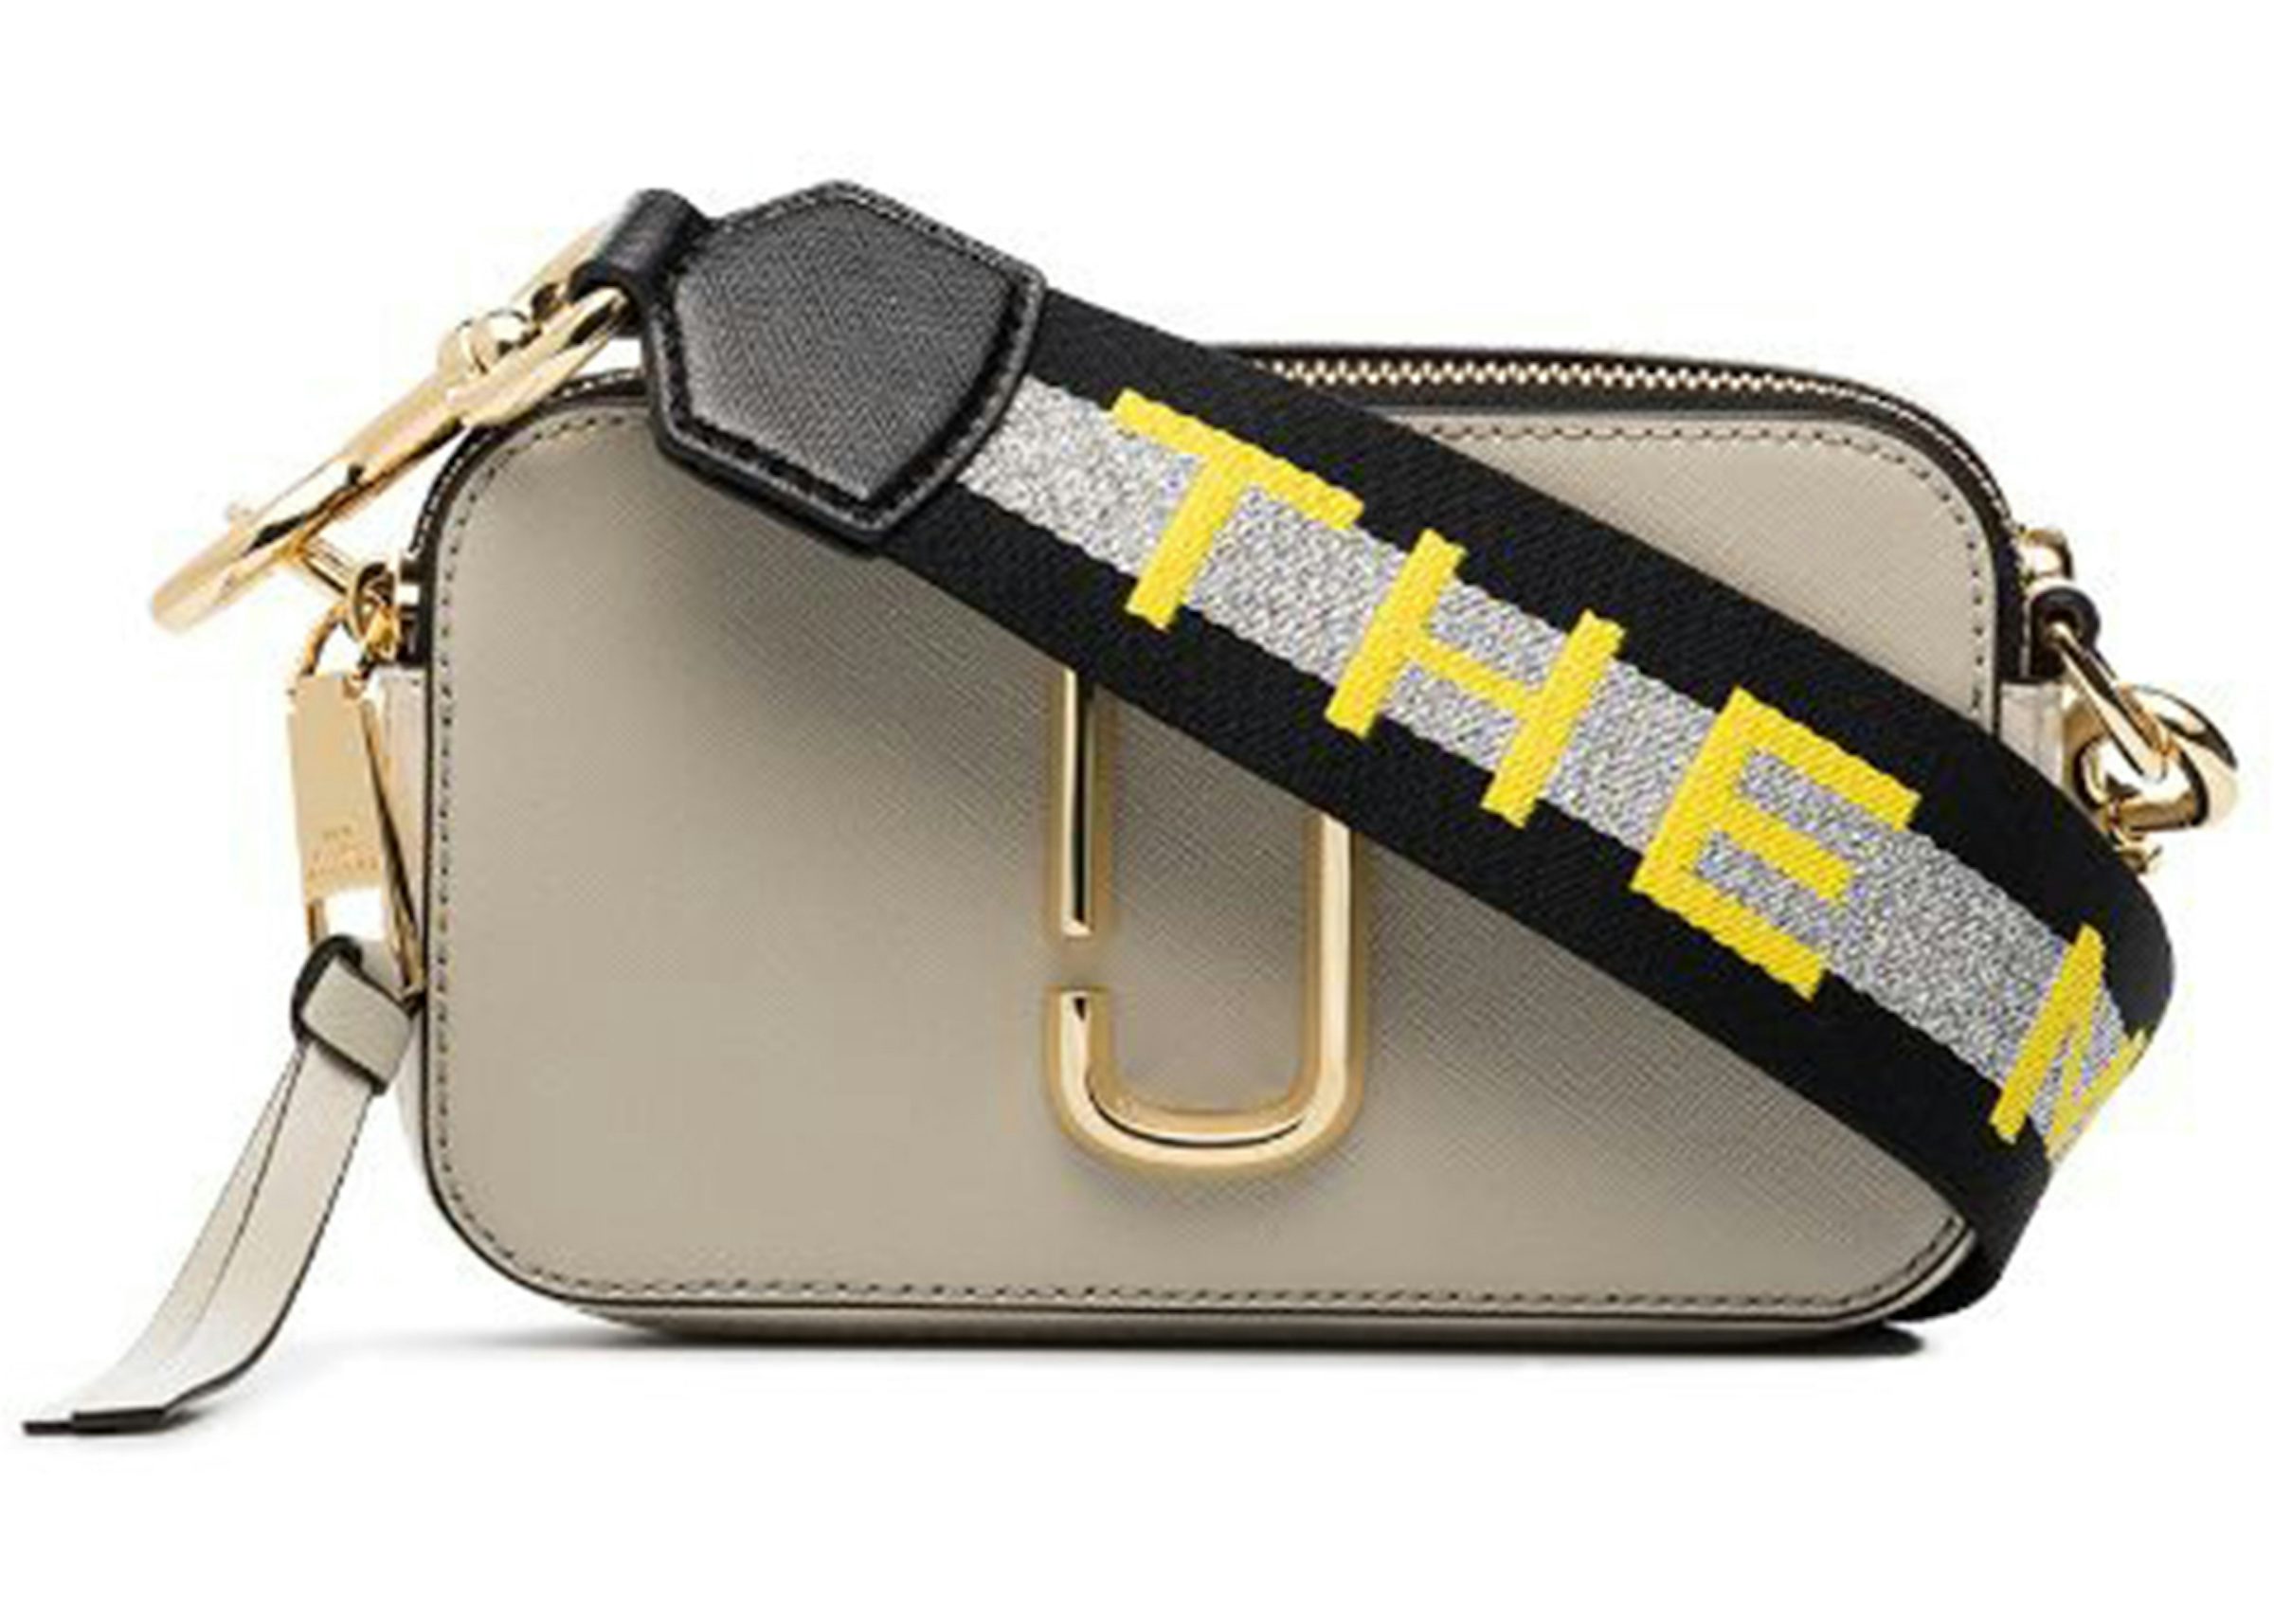 Marc Jacobs The Snapshot Camera Bag Light Grey in Leather with